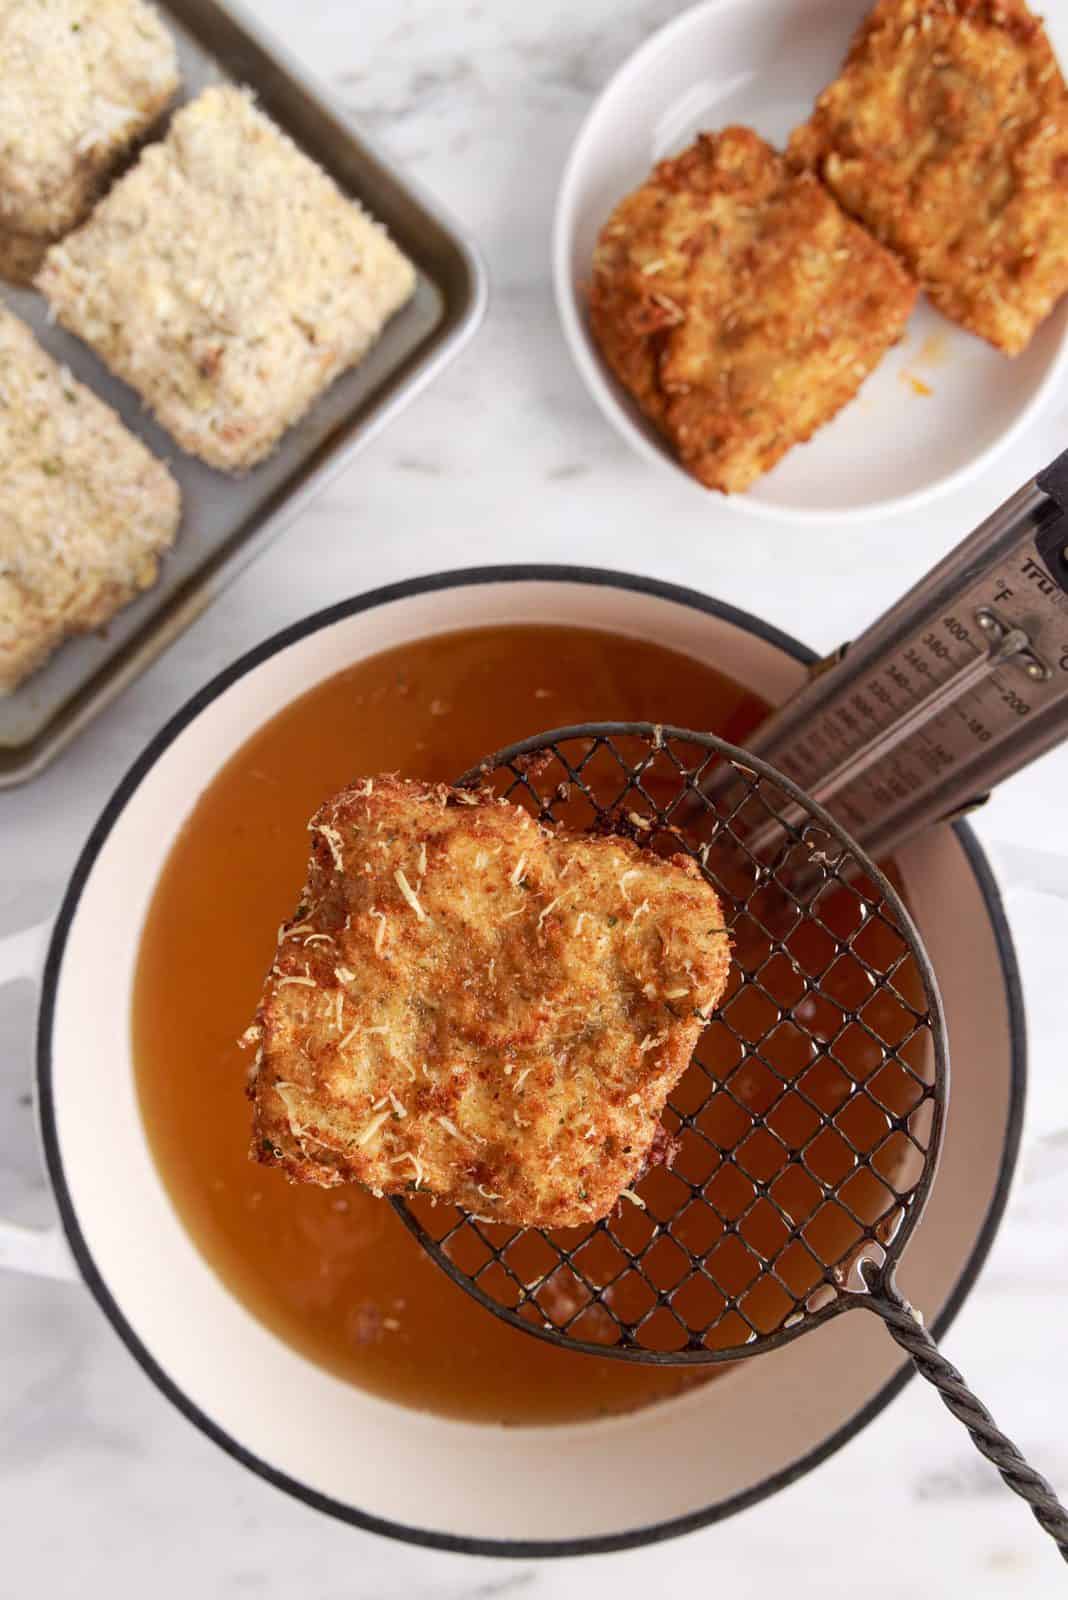 Spider strainer lifting up fried lasagna out of oil.